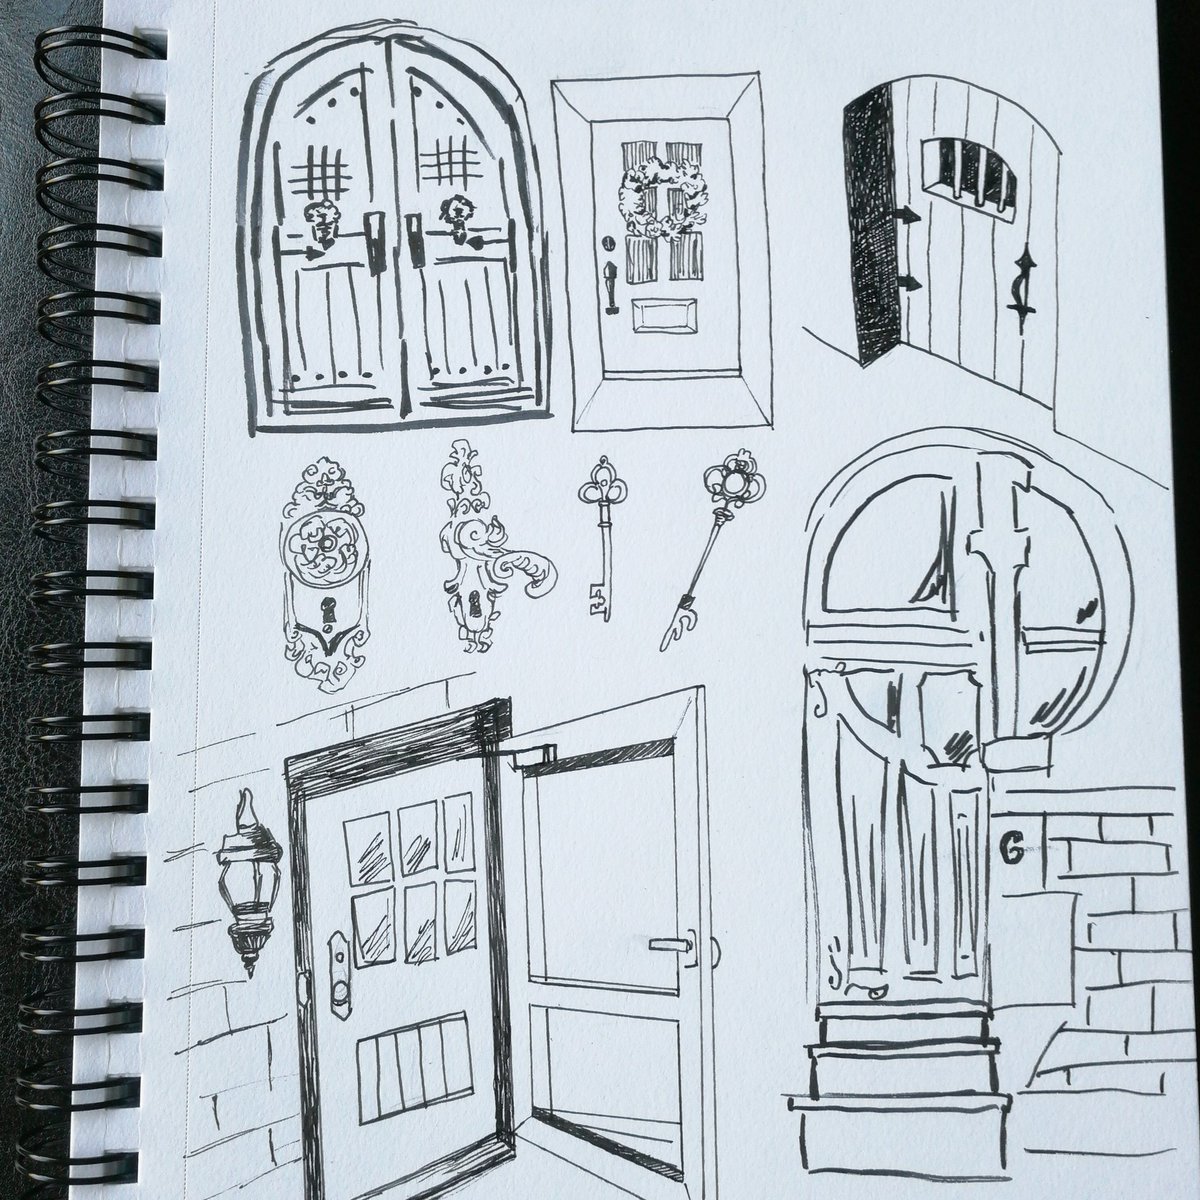 Inktober day 6: Door. Trying to have fun and experiment instead of being perfect 
#inktober2019 #inktober 